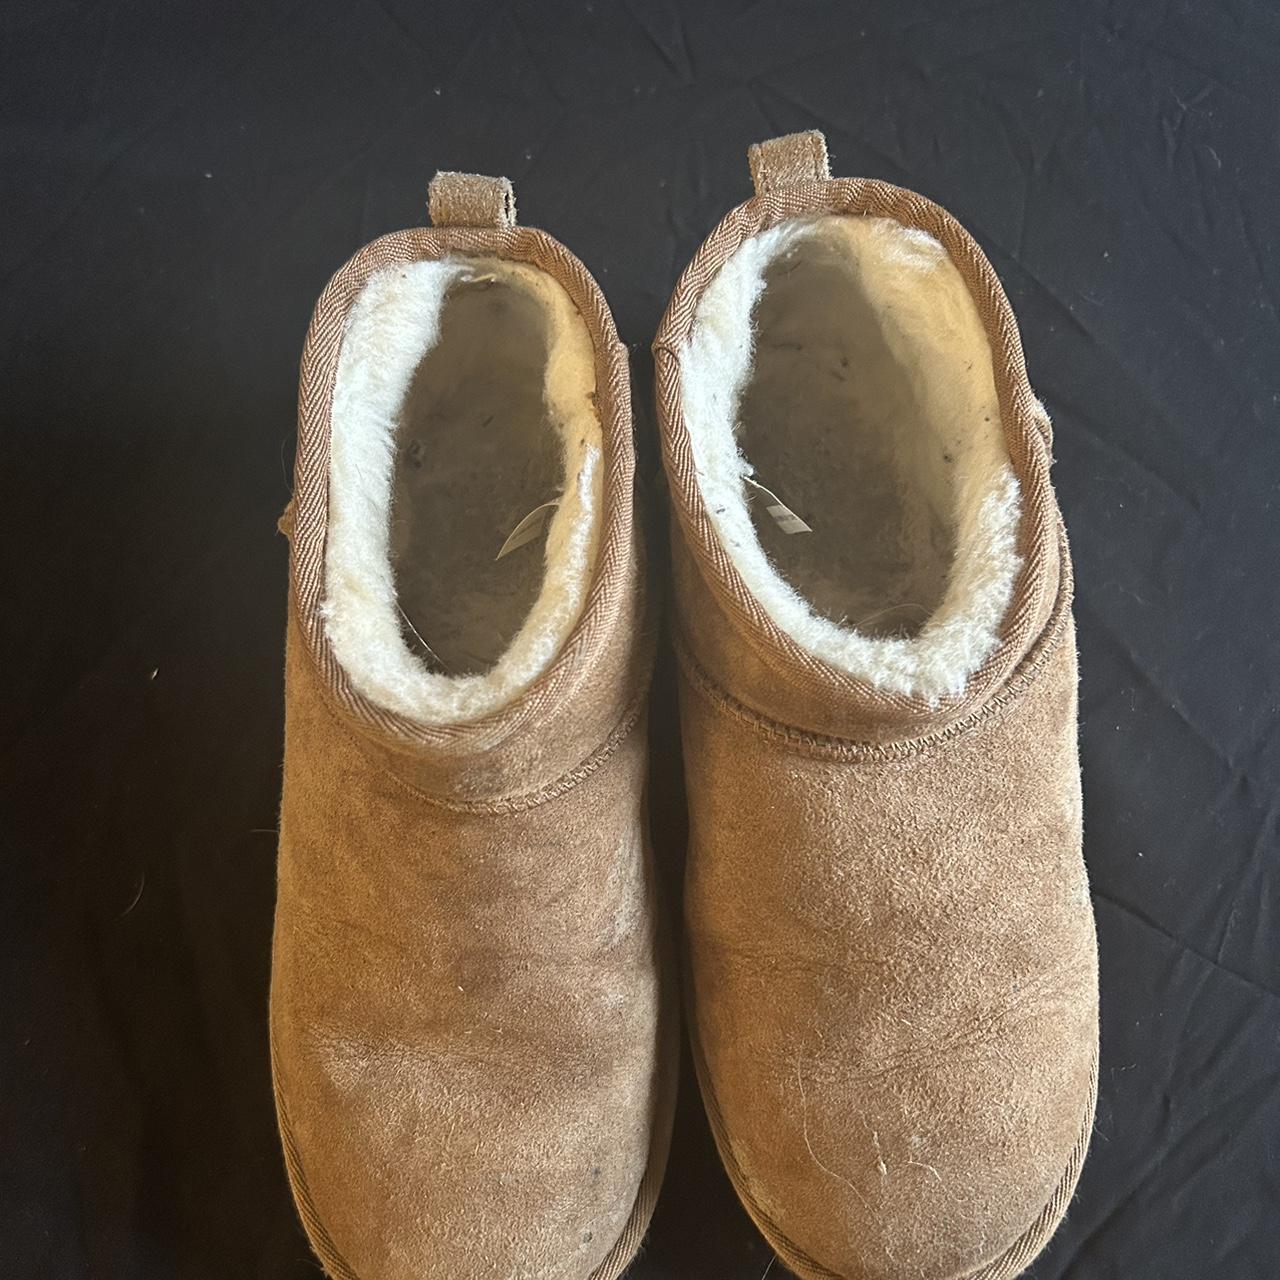 ugg minis, can clean before - Depop